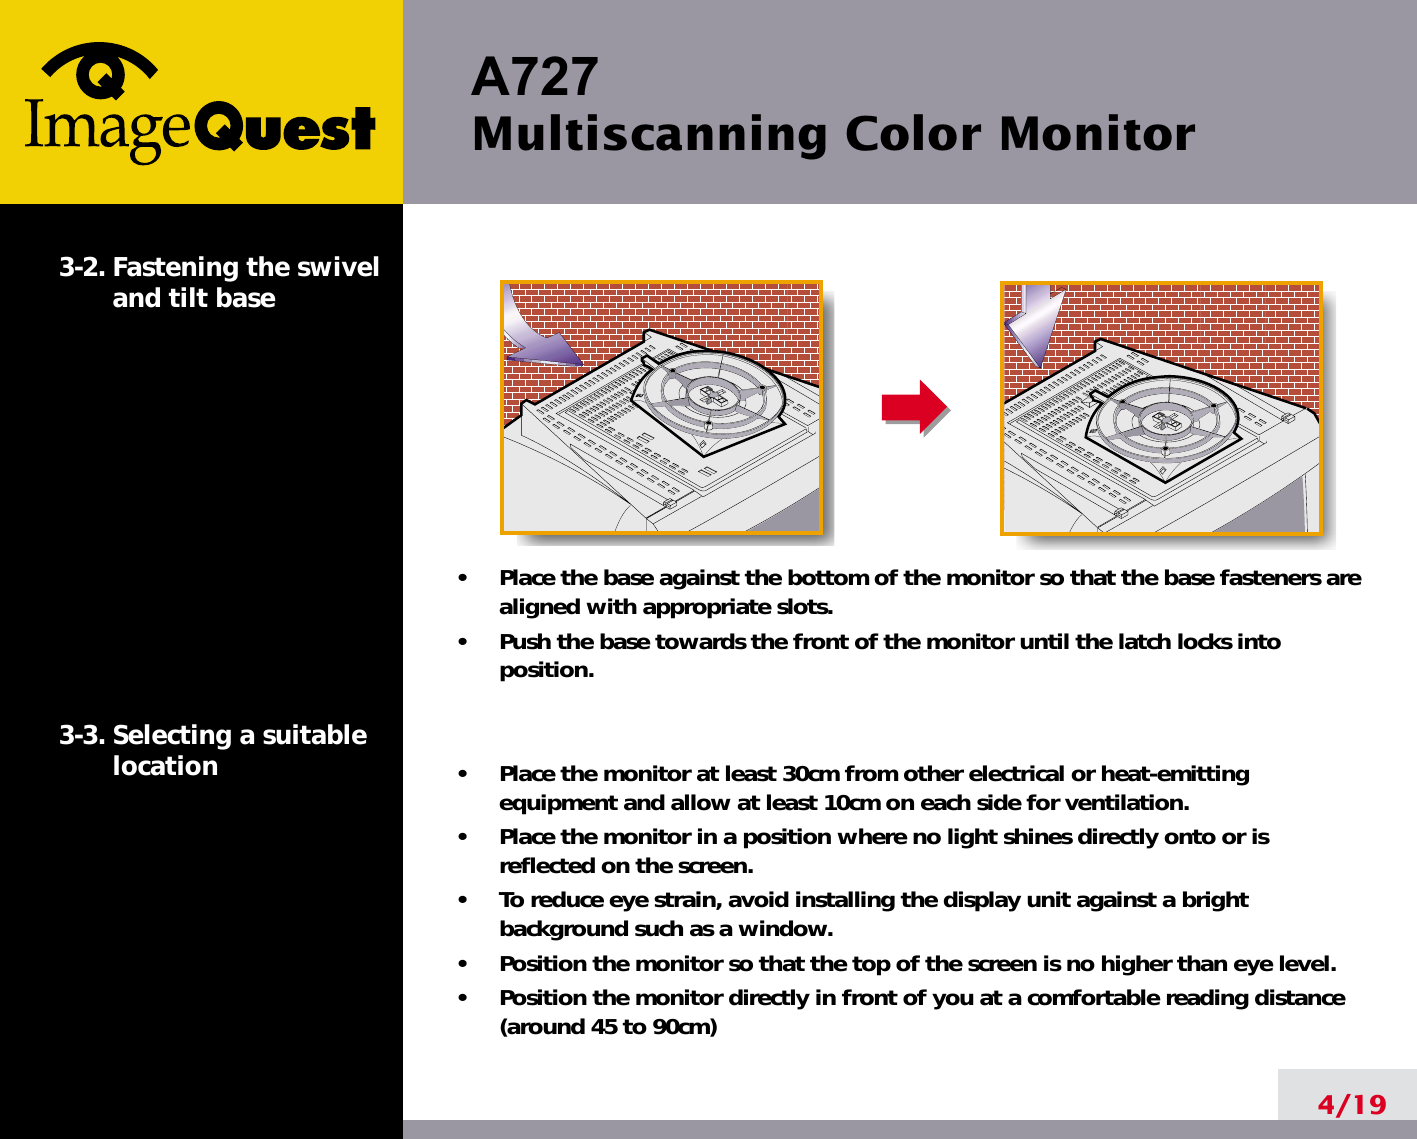 A727 Multiscanning Color Monitor4/193-2. Fastening the swiveland tilt base3-3. Selecting a suitablelocation•     Place the base against the bottom of the monitor so that the base fasteners arealigned with appropriate slots.•     Push the base towards the front of the monitor until the latch locks intoposition.•     Place the monitor at least 30cm from other electrical or heat-emittingequipment and allow at least 10cm on each side for ventilation.•     Place the monitor in a position where no light shines directly onto or isreflected on the screen.•     To reduce eye strain, avoid installing the display unit against a brightbackground such as a window.•     Position the monitor so that the top of the screen is no higher than eye level.•     Position the monitor directly in front of you at a comfortable reading distance(around 45 to 90cm) 